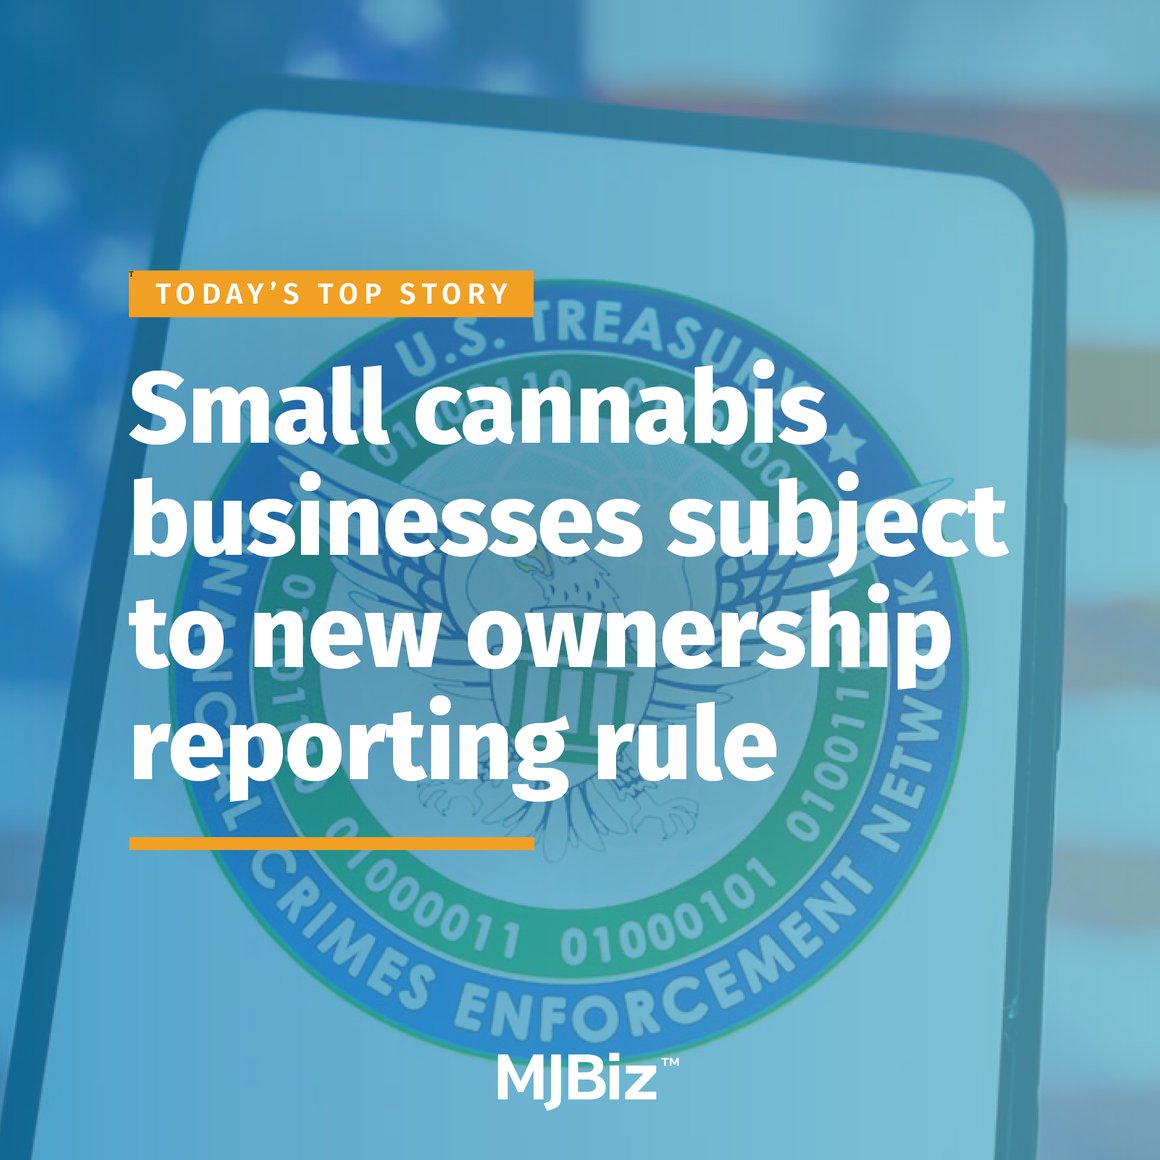 Small cannabis businesses subject to new ownership reporting rule